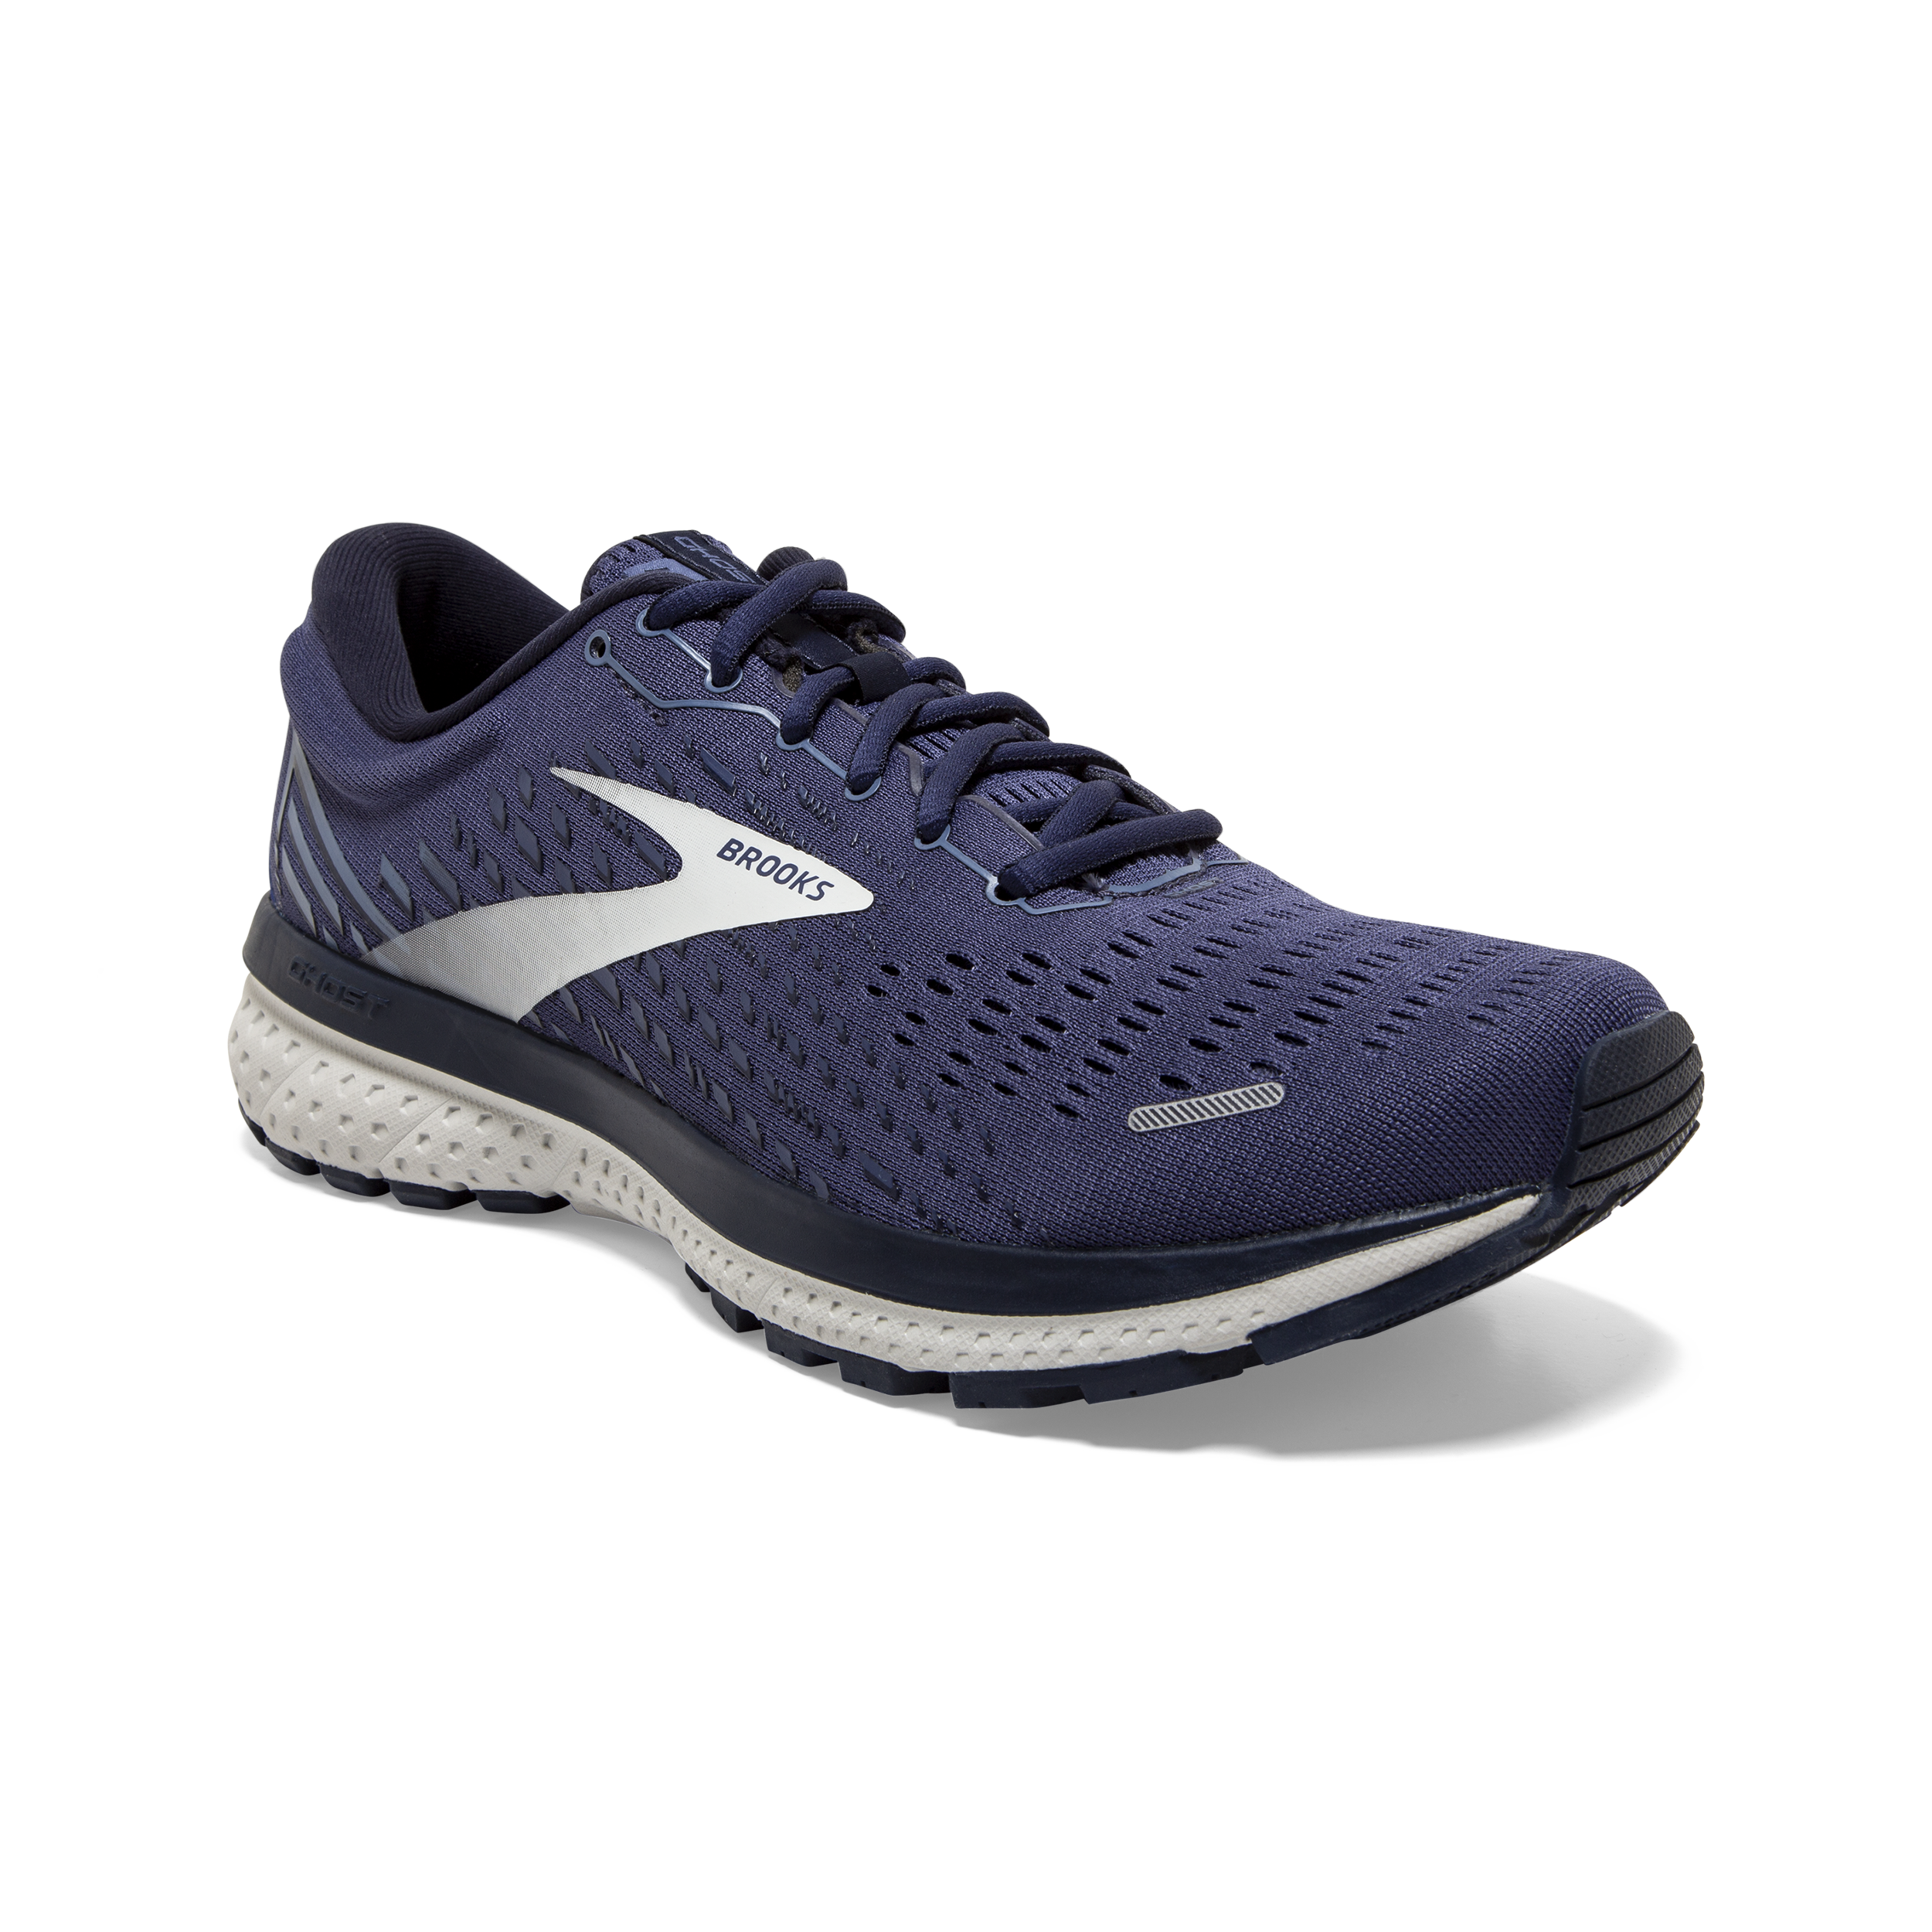 Details about   Brooks Ghost Running Shoes Mens Neutral Cushioning Trainers Navy UK 10.5 EU 45.5 